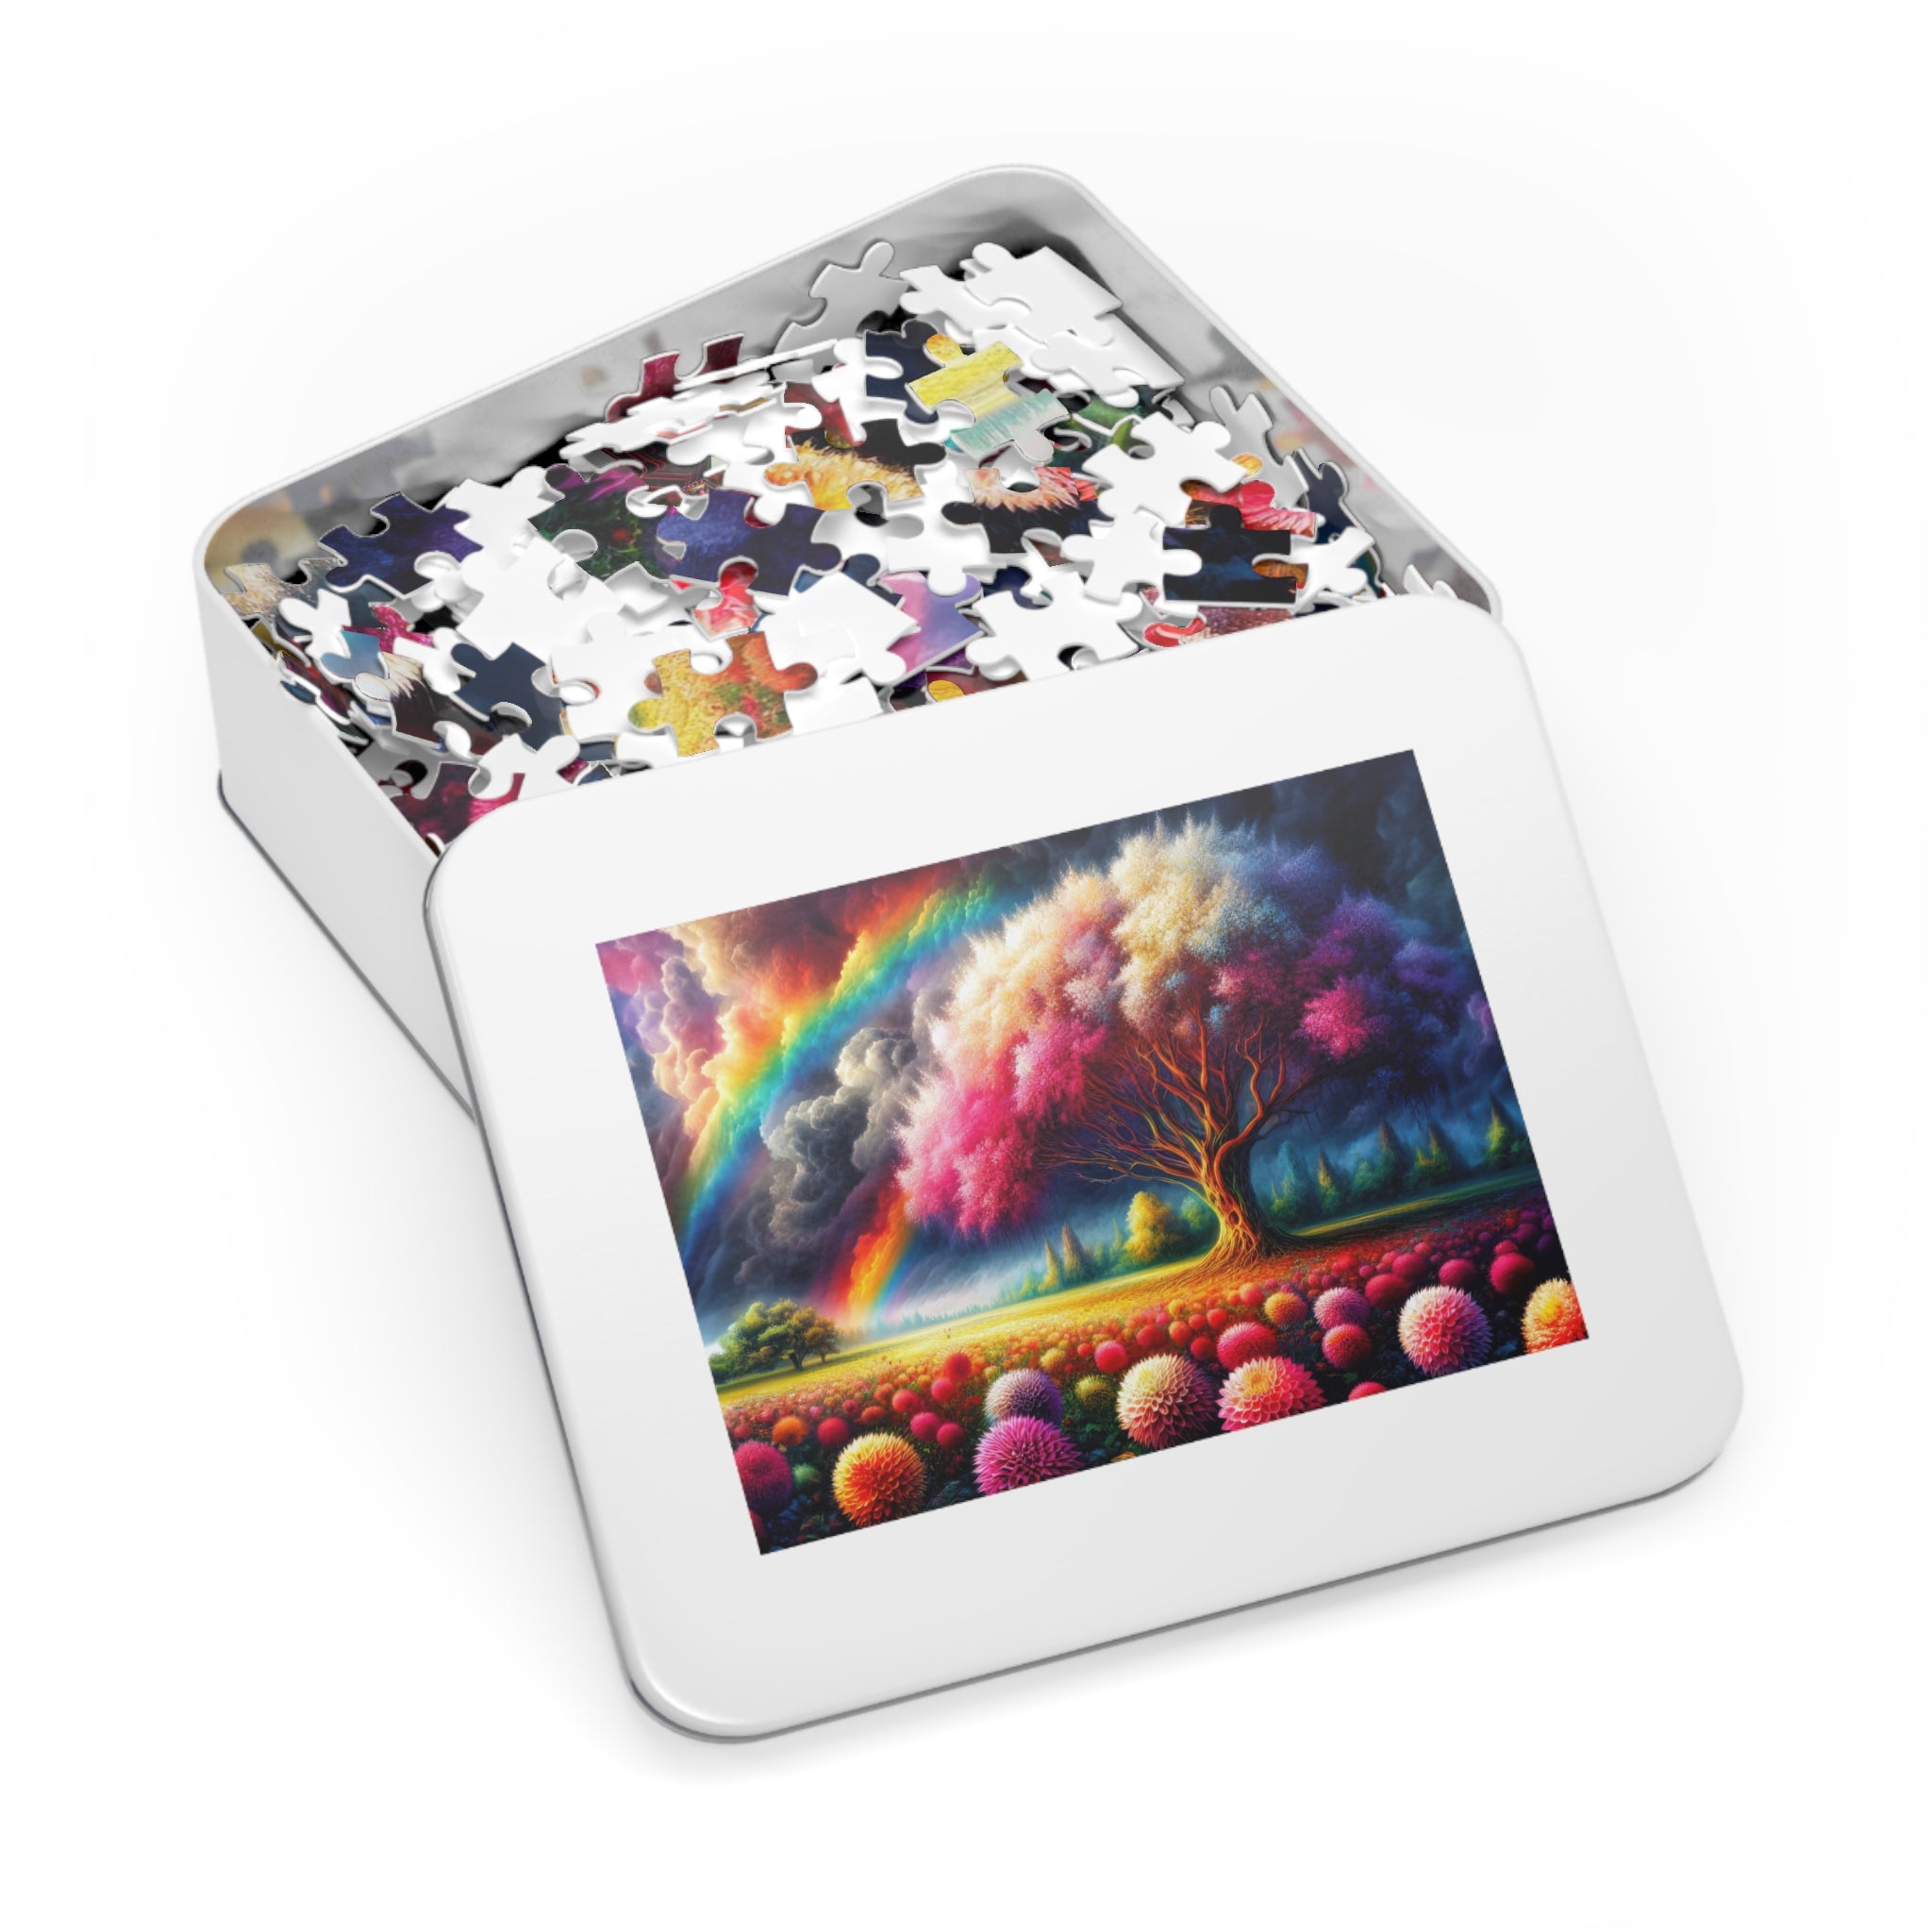 The Blossom of Chromatic Wonders Jigsaw Puzzle